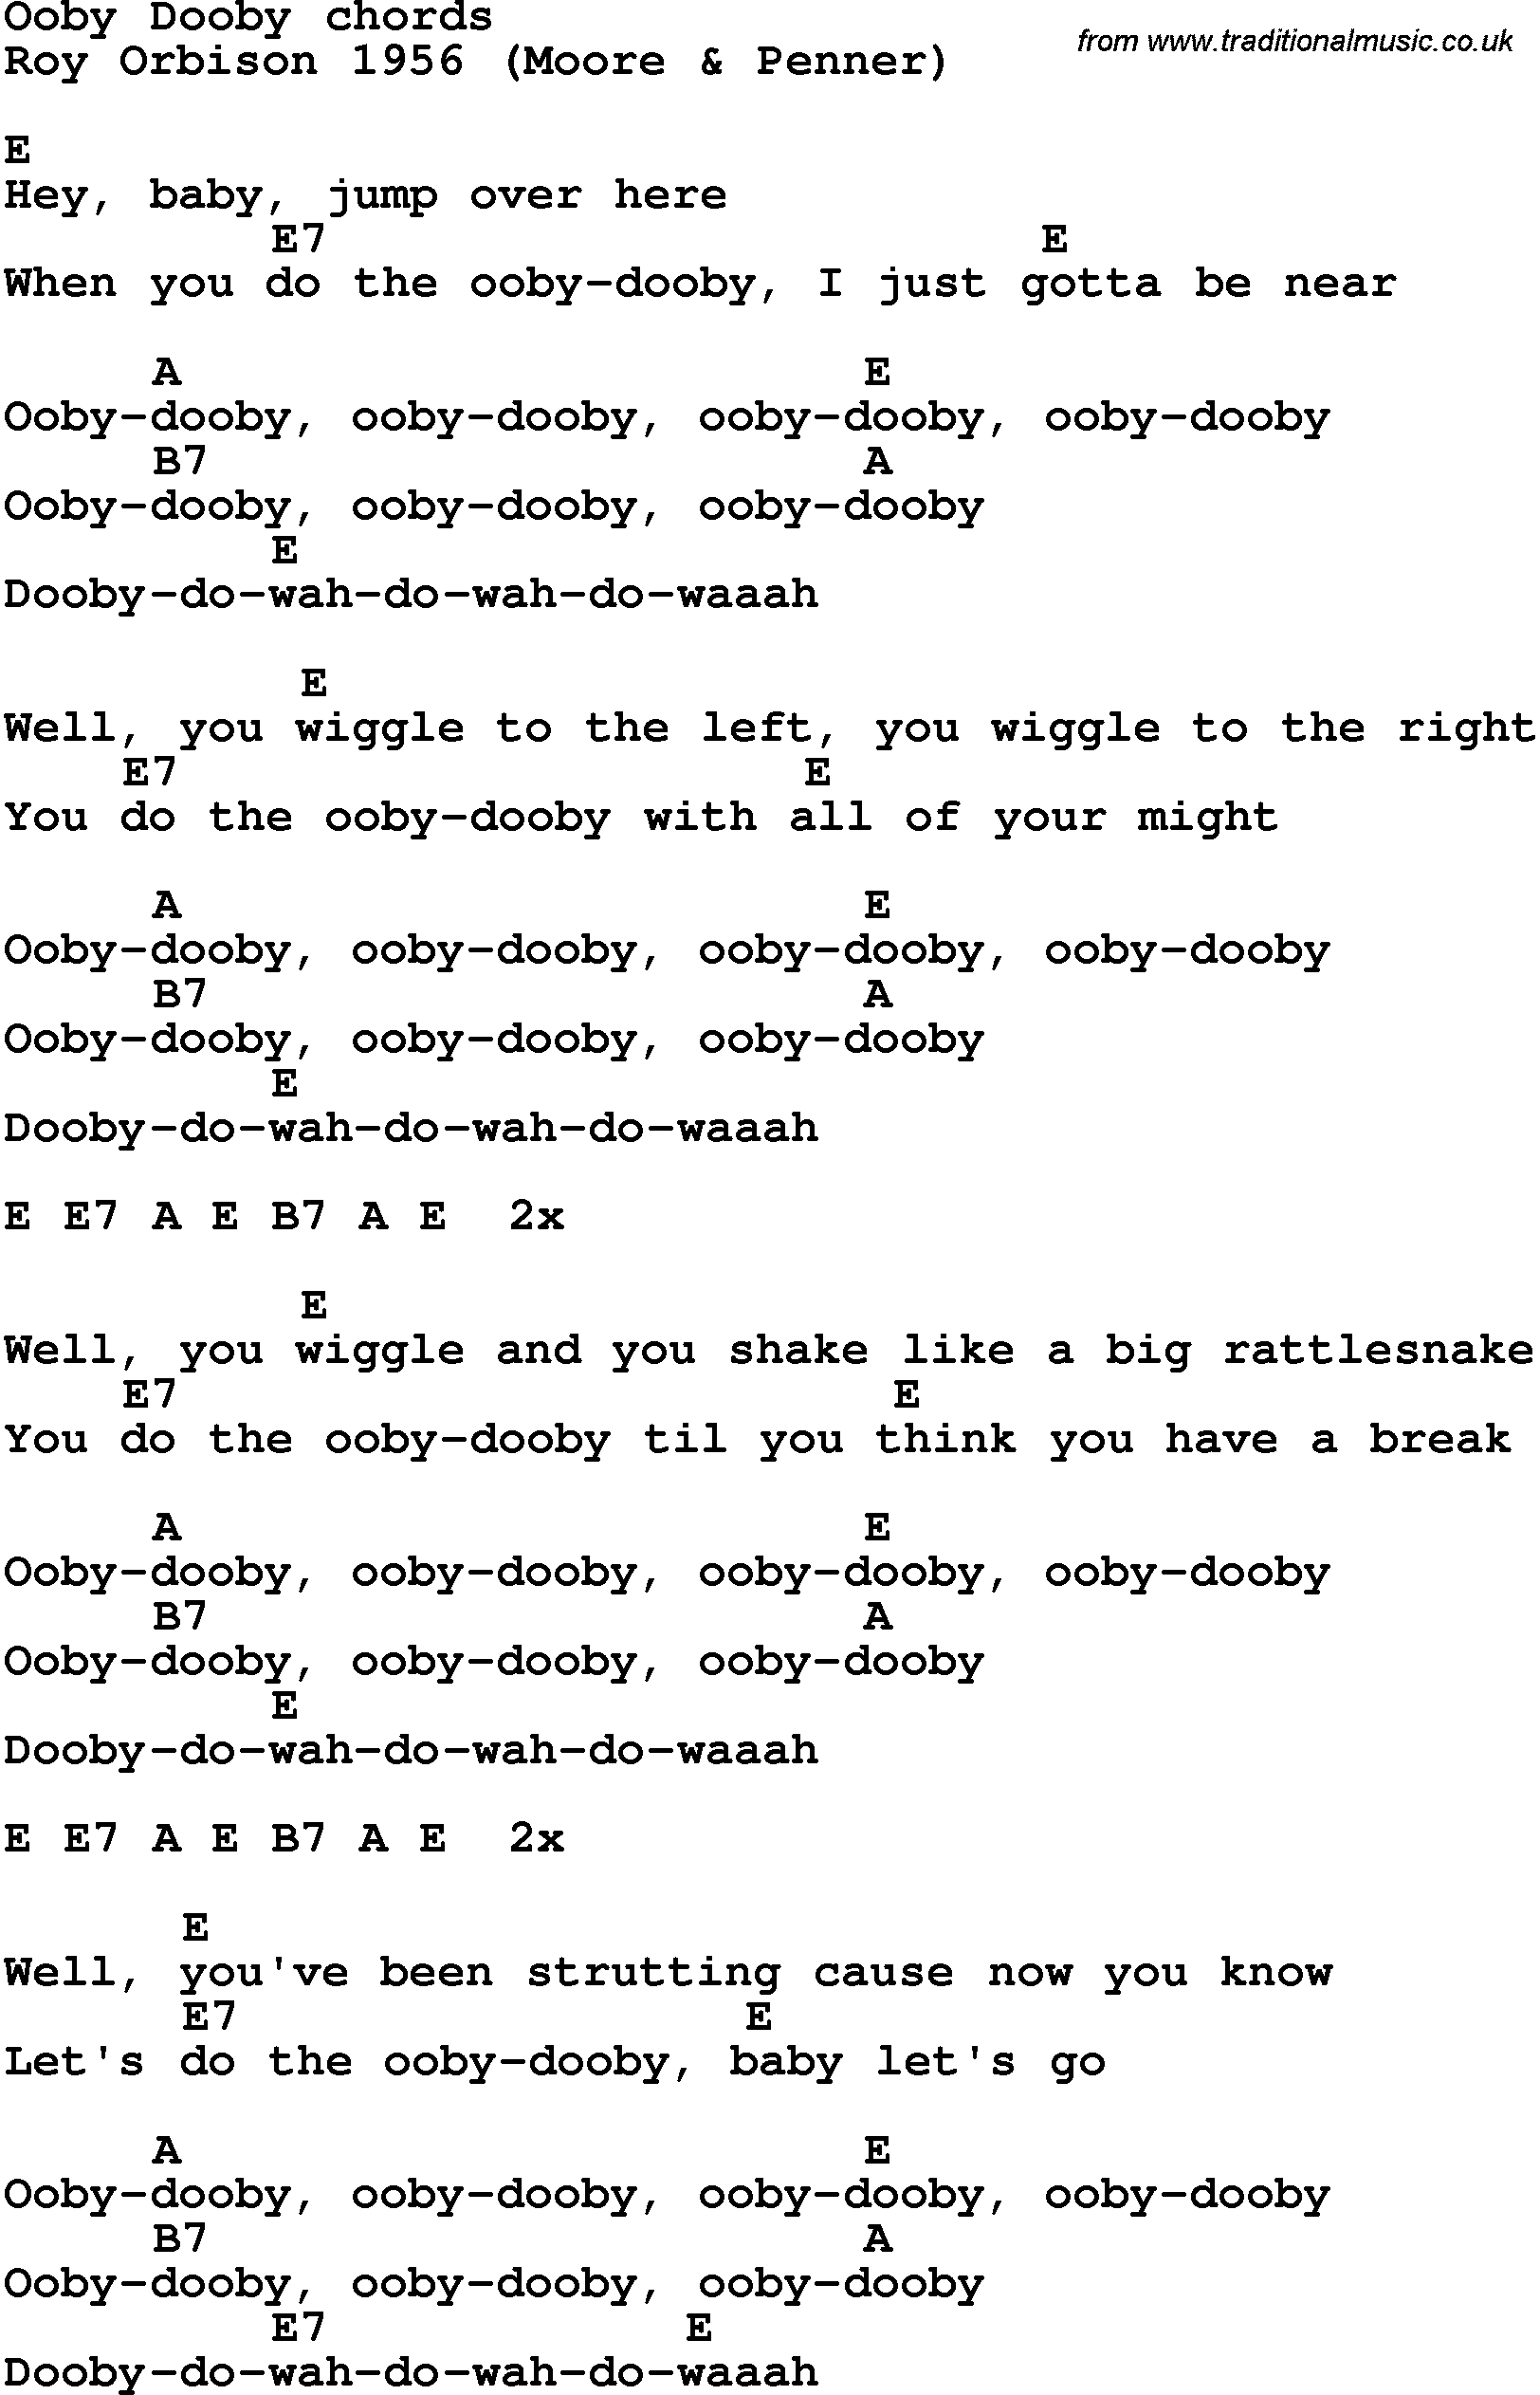 Song Lyrics with guitar chords for Ooby Dooby